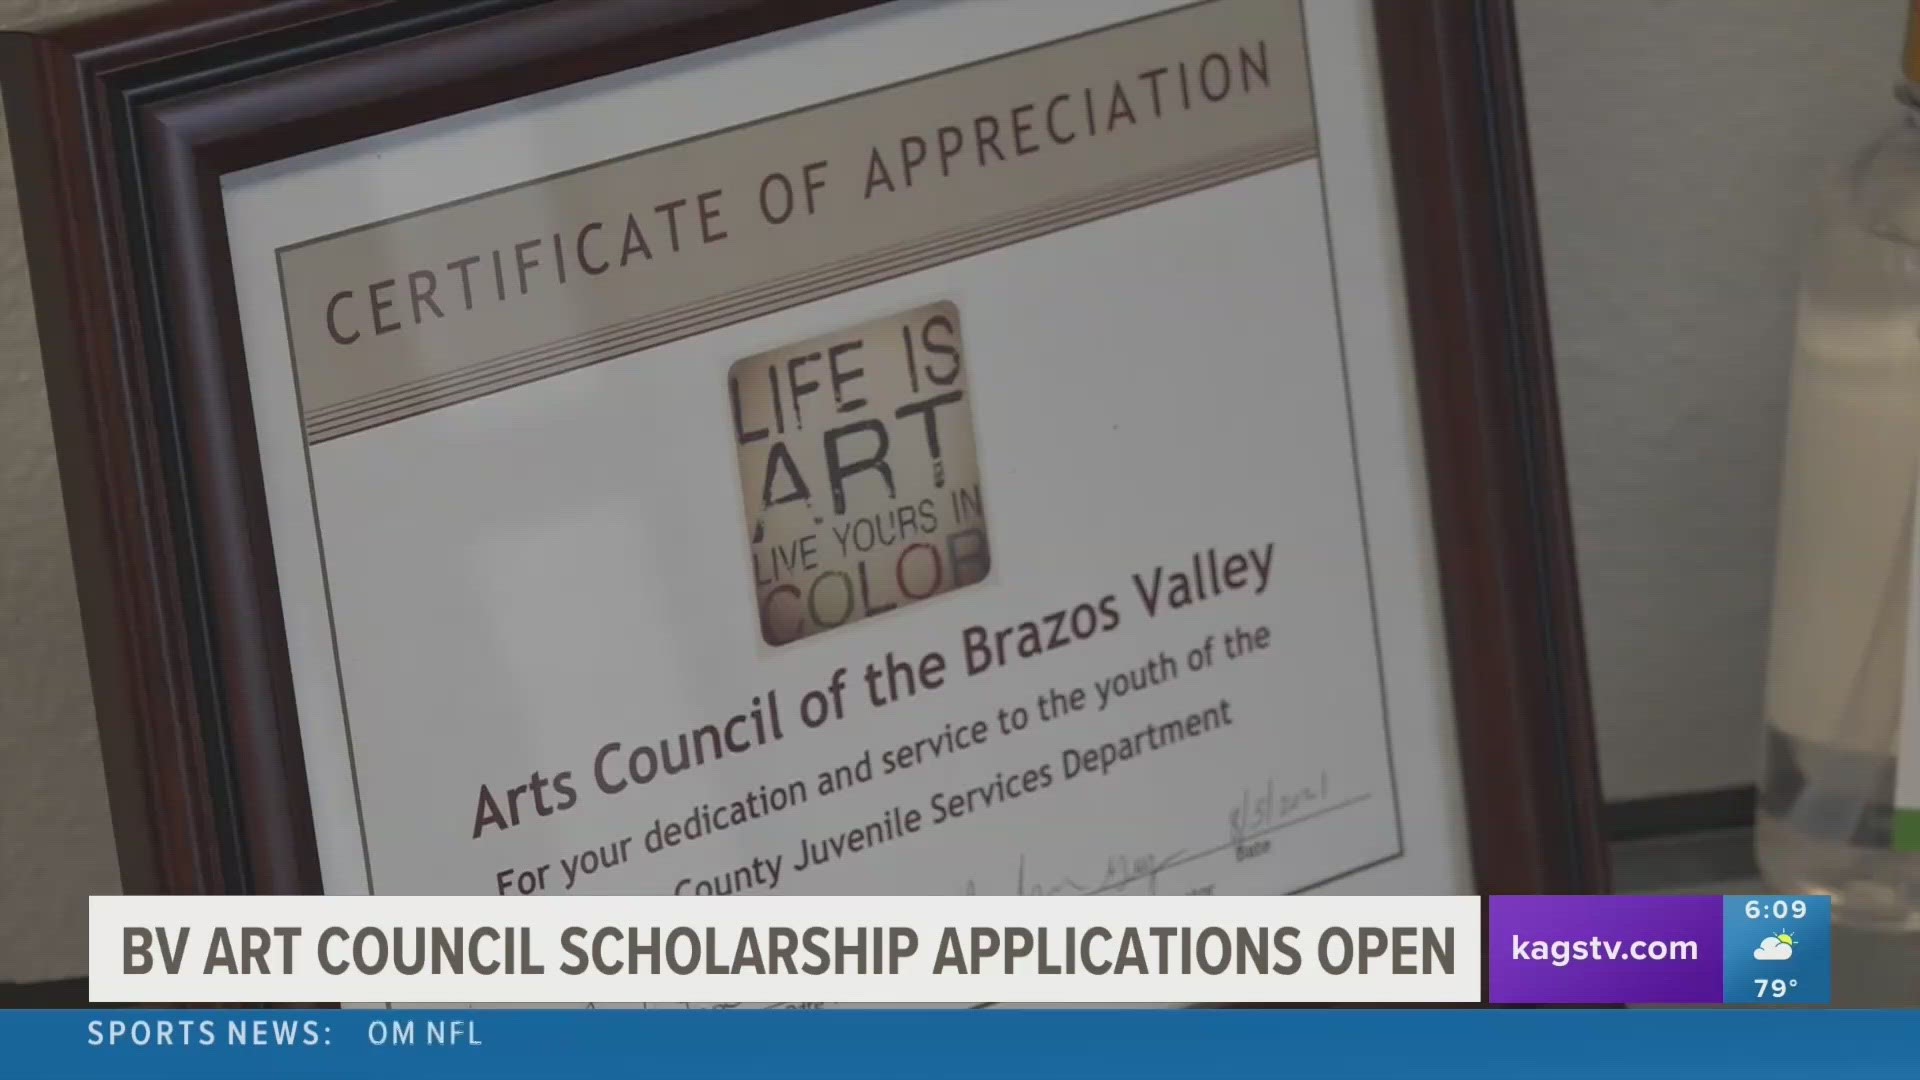 The Arts Council of the Brazos Valley Scholarship Applications are now open to high school seniors looking to pursue a career in arts.